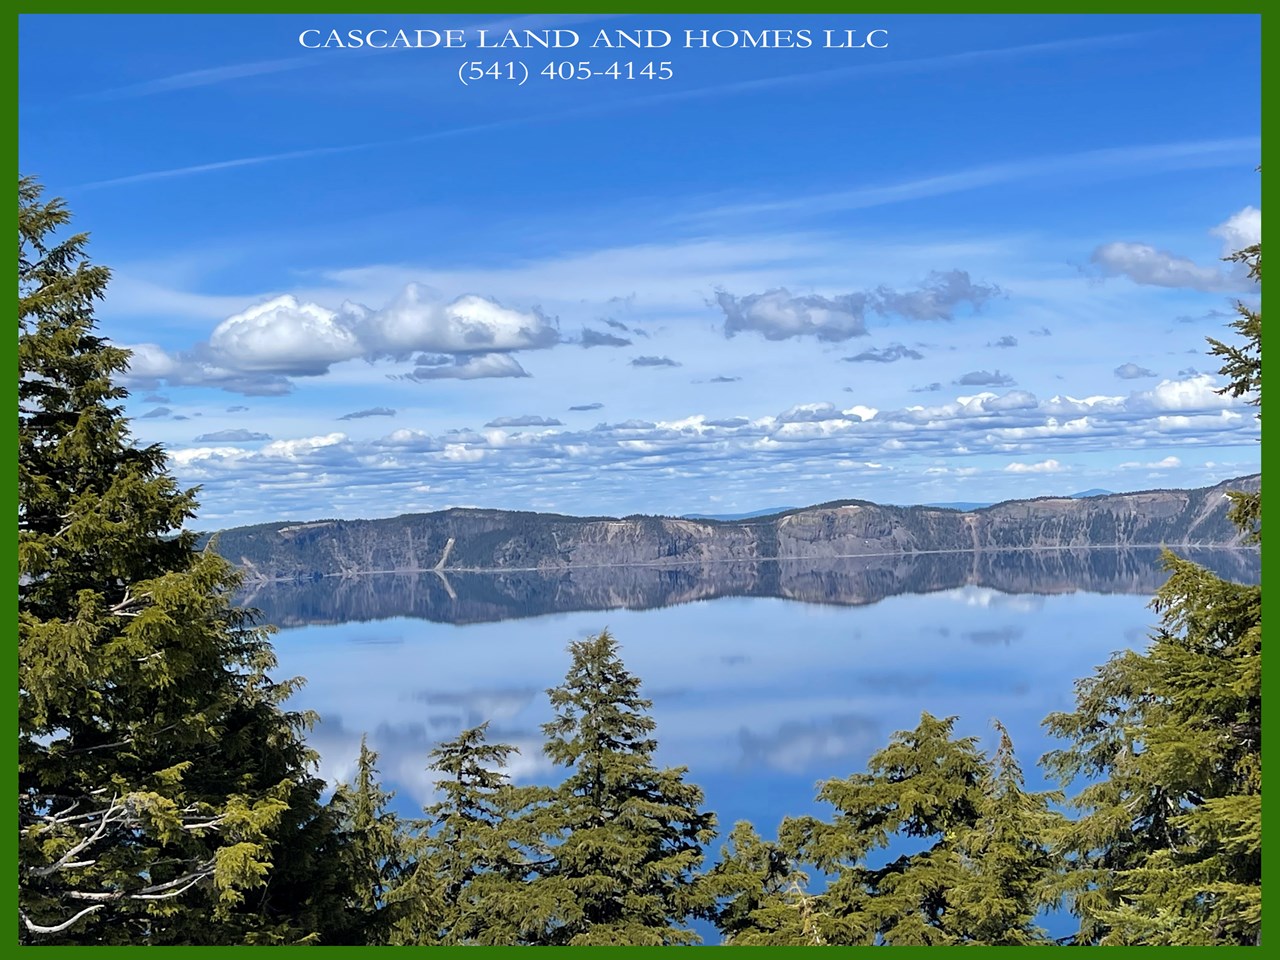 it's only about an hour to crater lake national park from here. crater lake is the deepest lake in the country, and is crystal clear! aside from the lake, you can also hike, camp, backpack and explore the park.